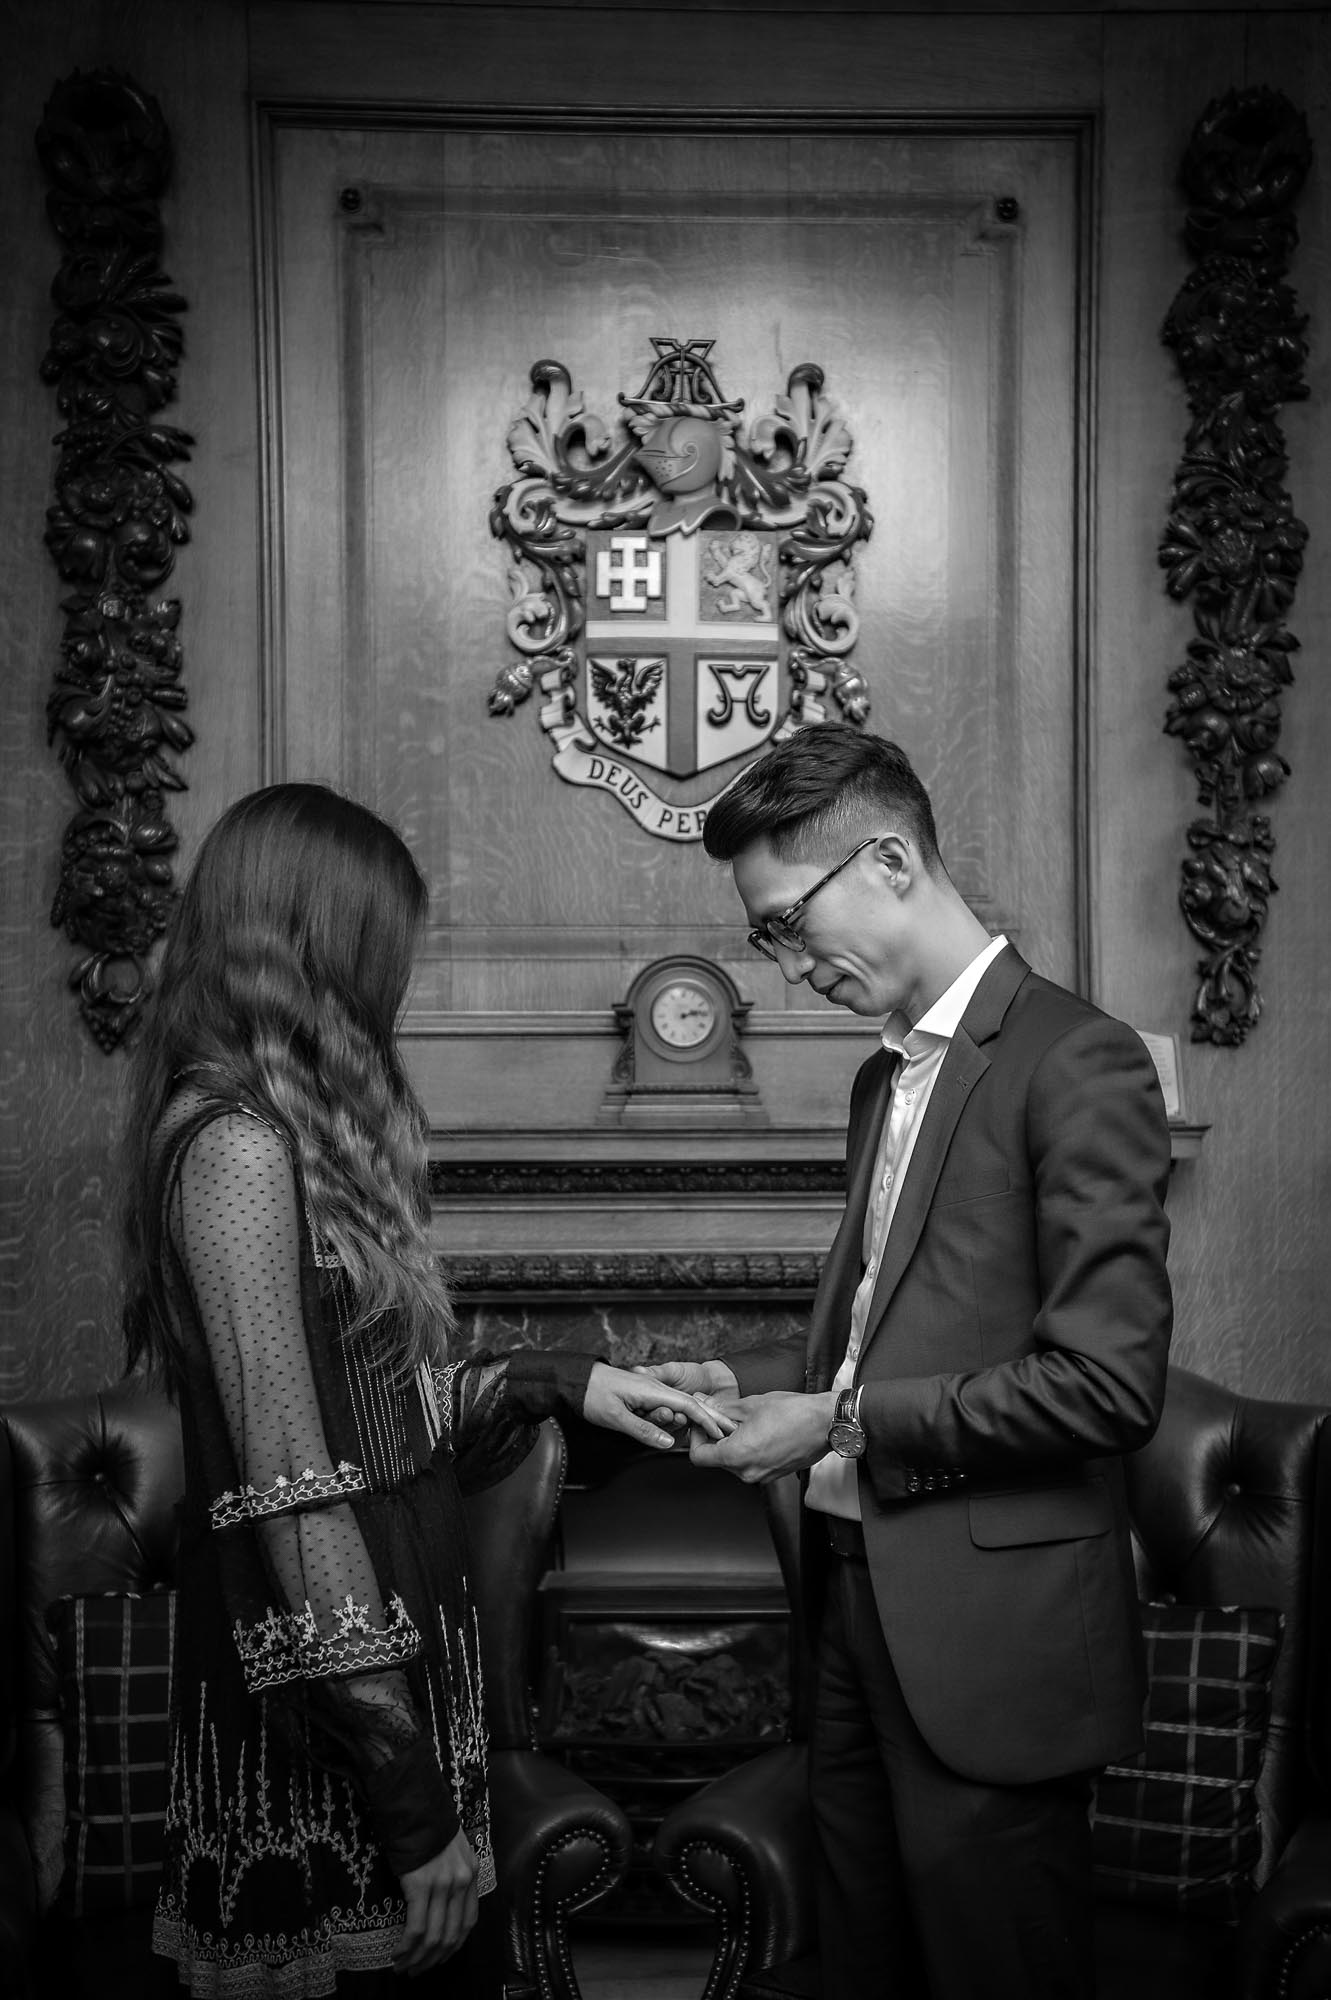 The groom places ring on bride's finger - black and white wedding portrait